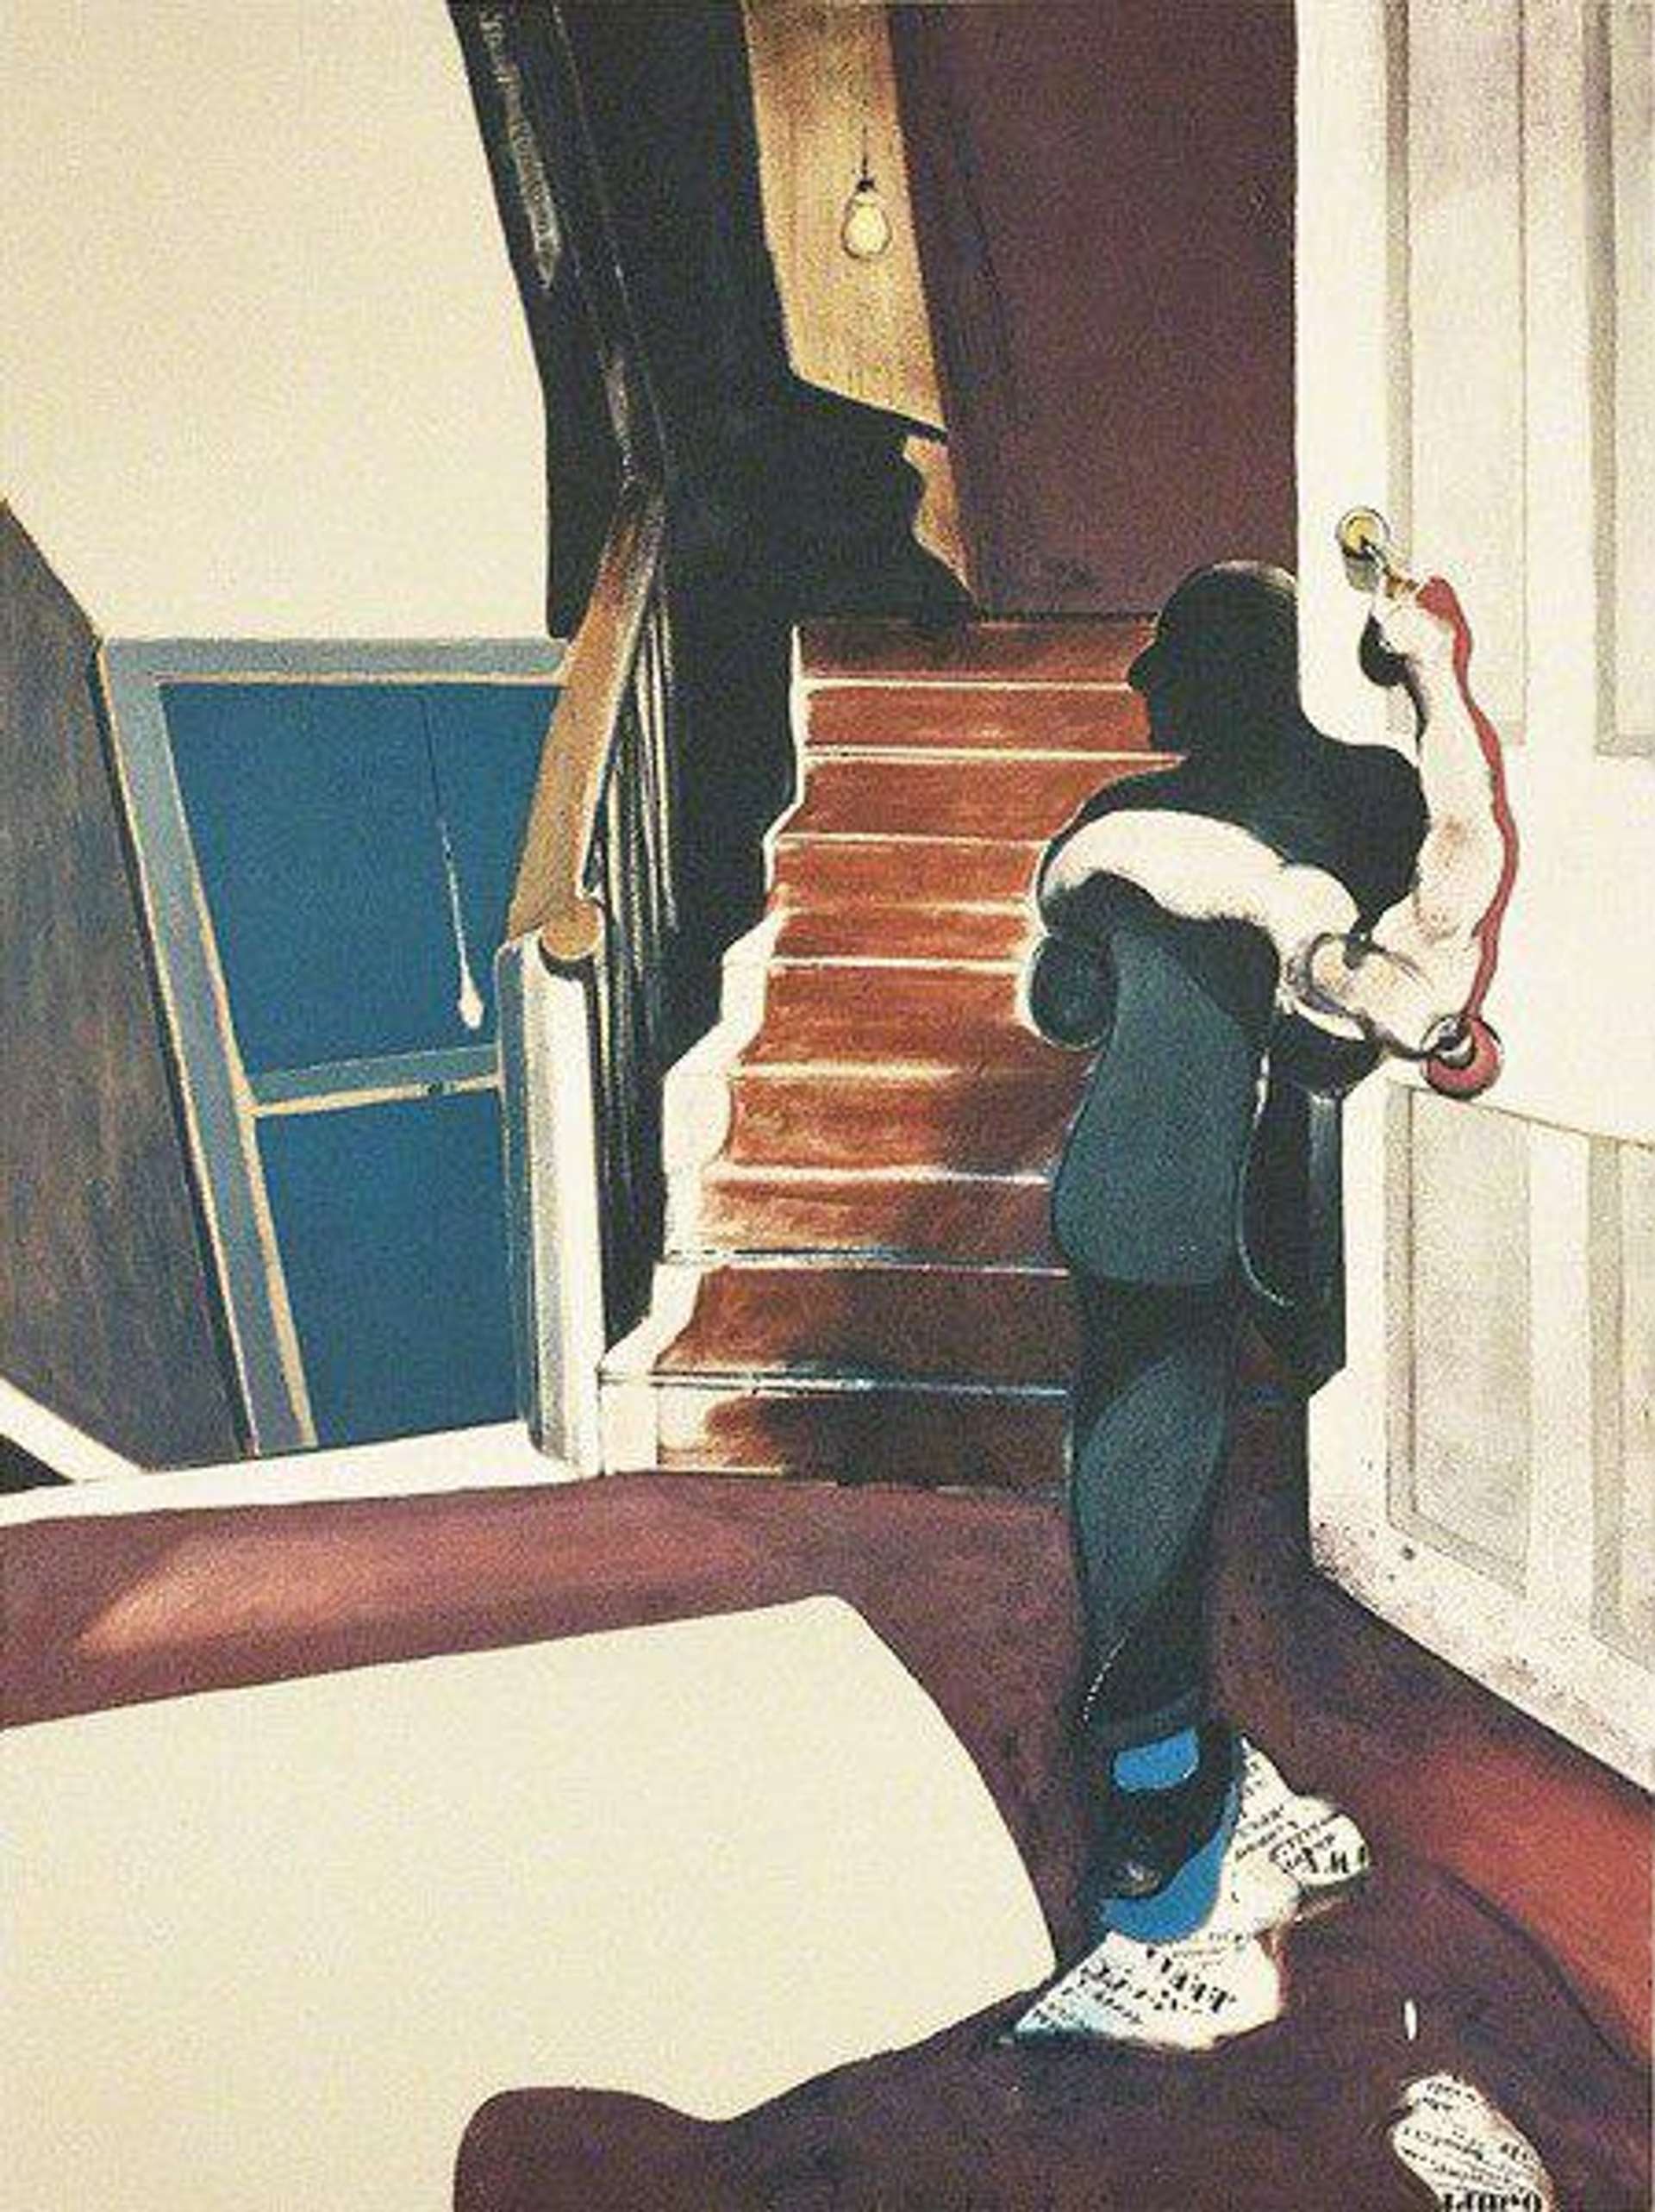 Francis Bacon's After Triptych In Memory Of George Dyer (centre panel). Silhouette of a man standing in a hallway next to a staircase and door.